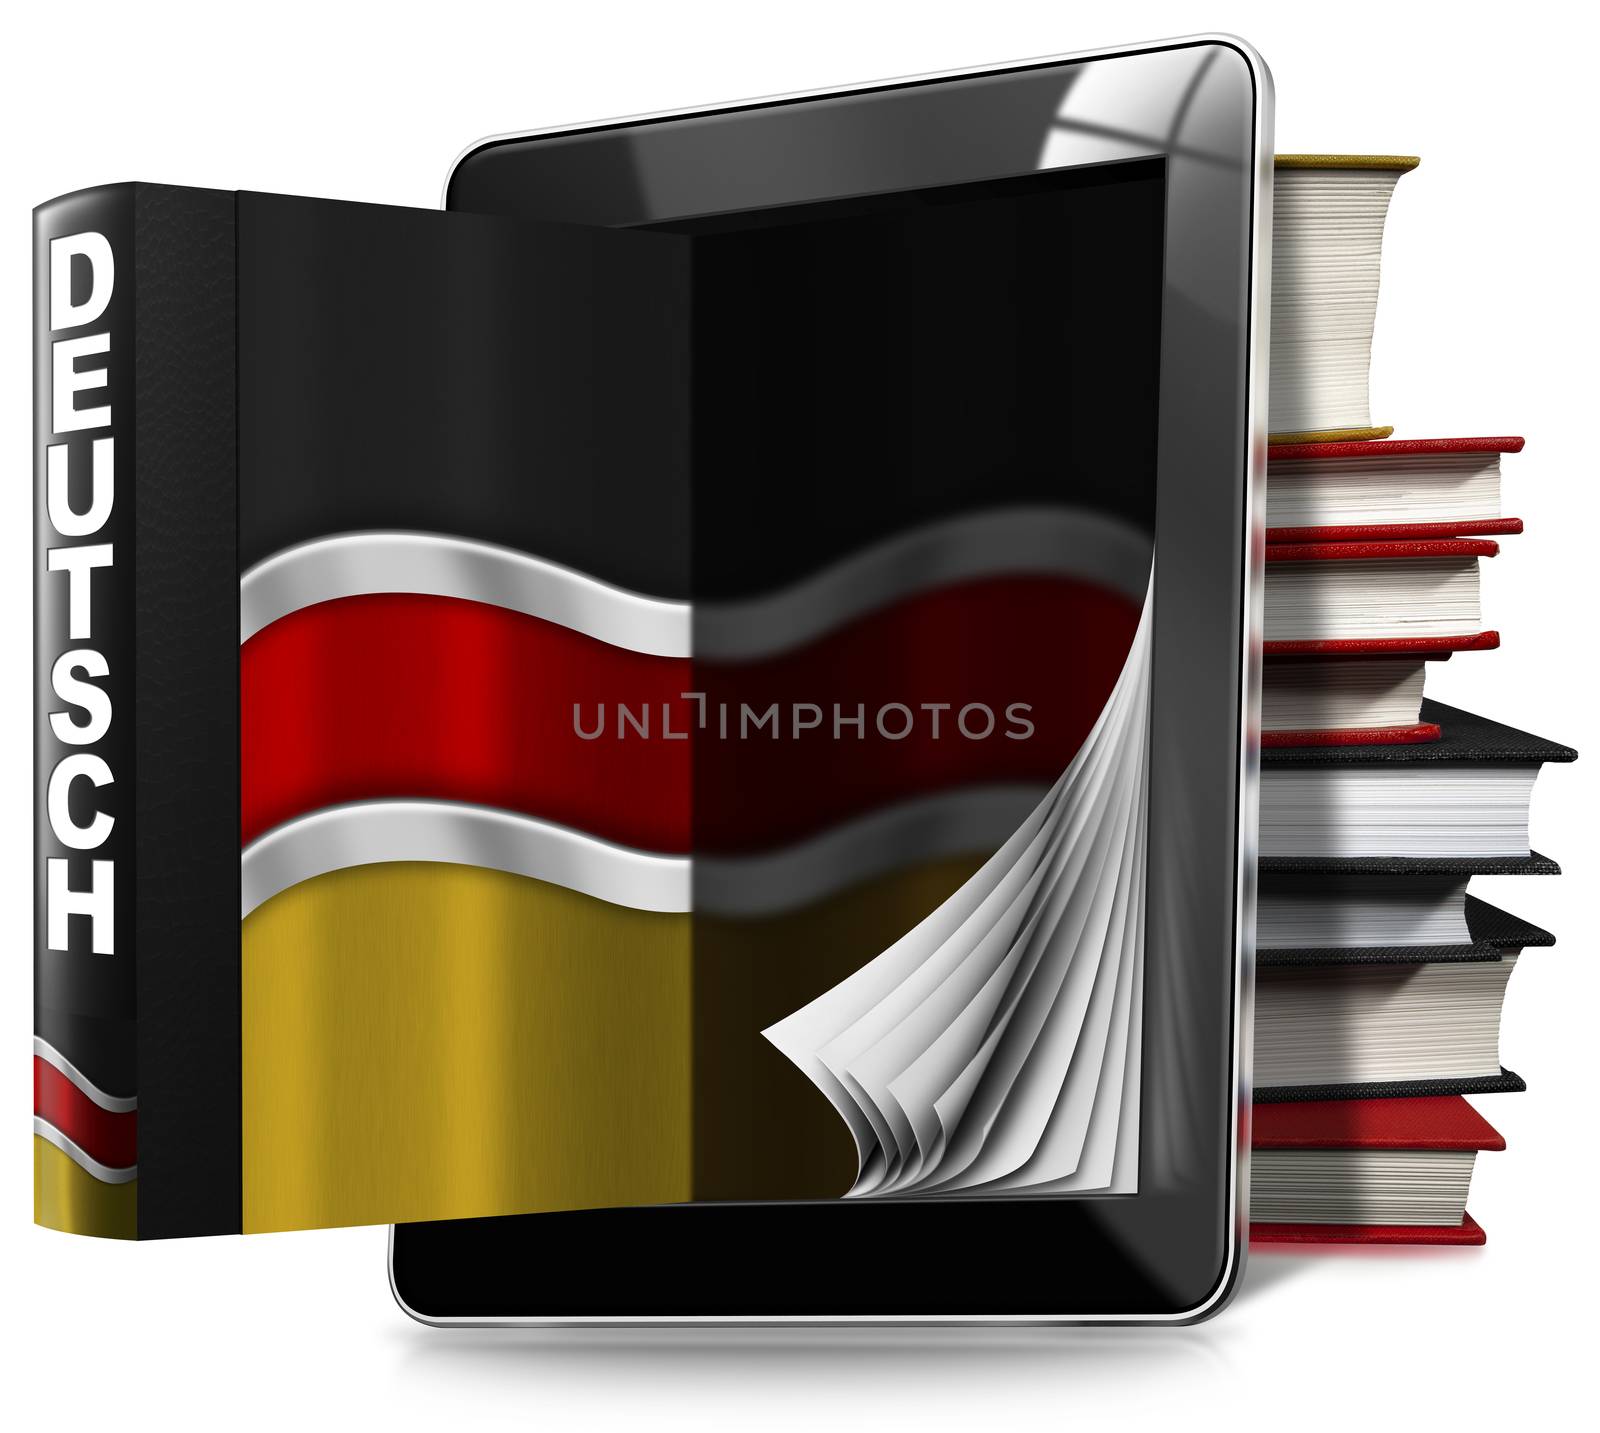 Black tablet computer with pages and an German book, a stack of books and German flag. Isolated on white background